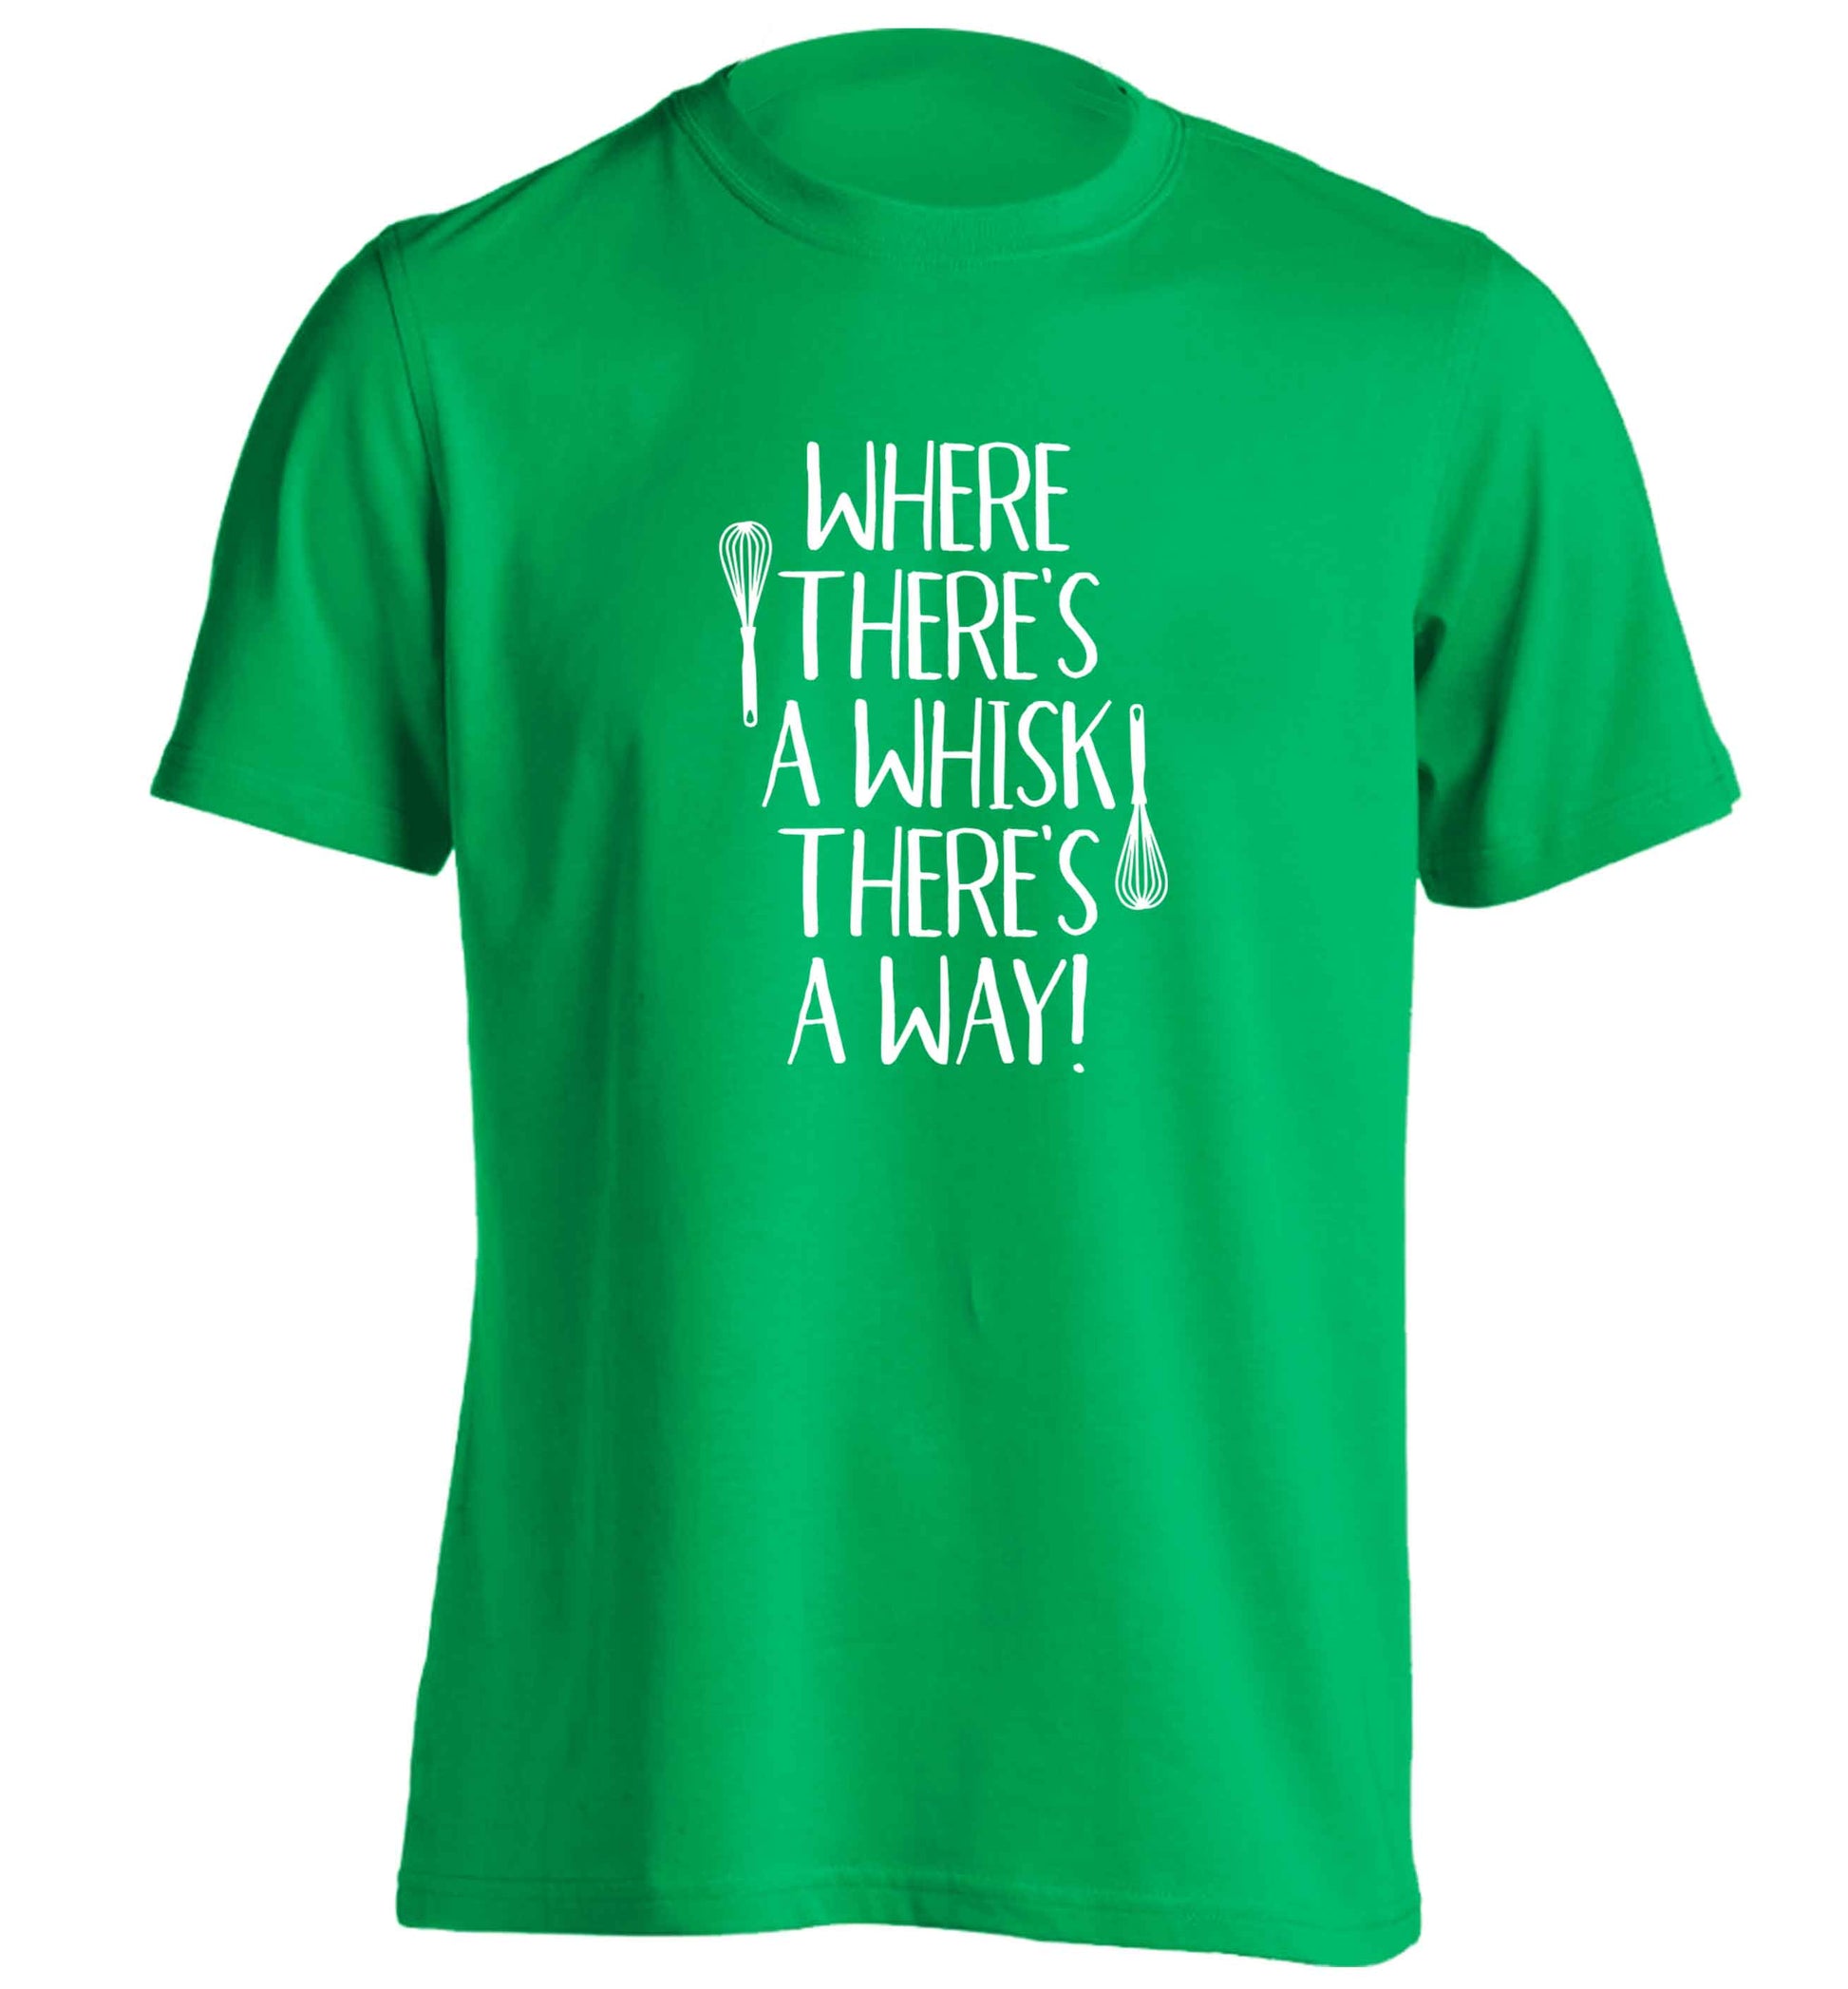 Where there's a whisk there's a way adults unisex green Tshirt 2XL